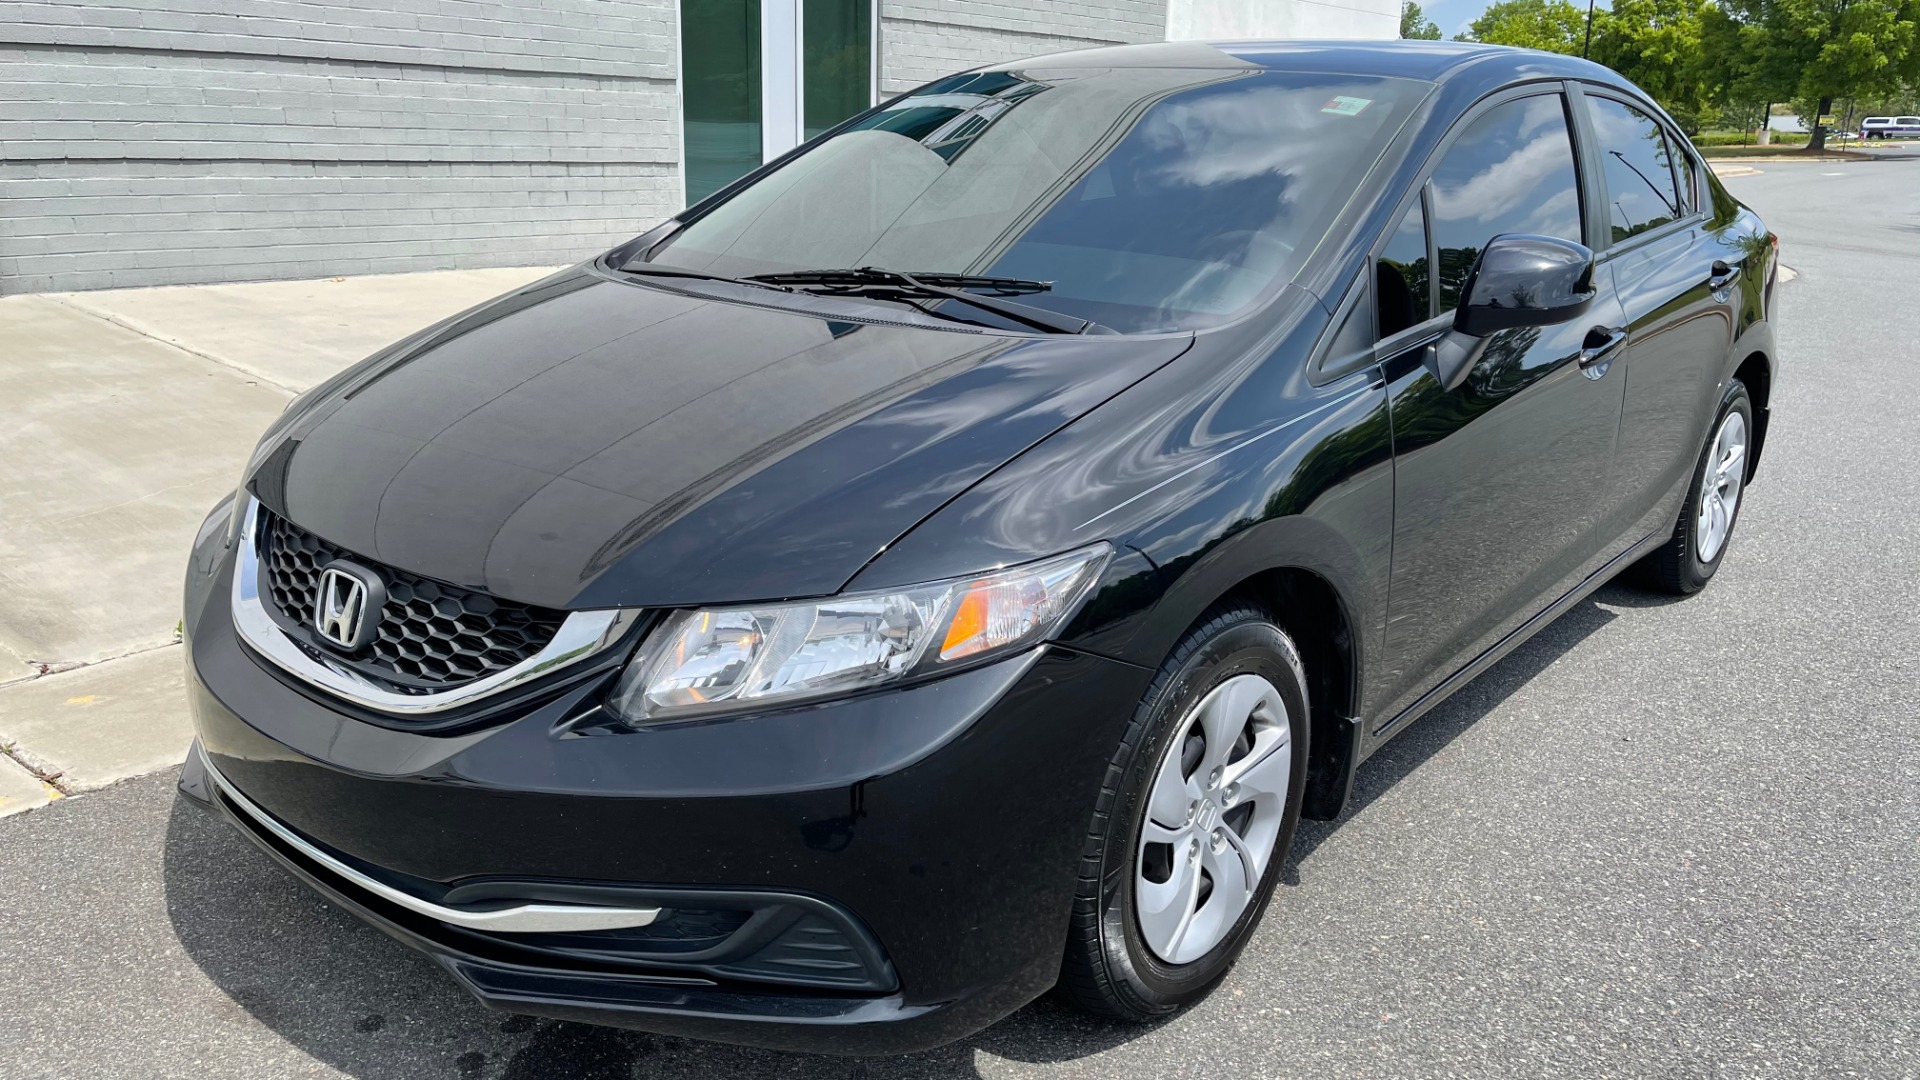 Used 2013 Honda CIVIC SEDAN LX / 5-SPD AUTO / 1.8L 4-CYL / BLUETOOTH / AIR CONDITIONING for sale Sold at Formula Imports in Charlotte NC 28227 2